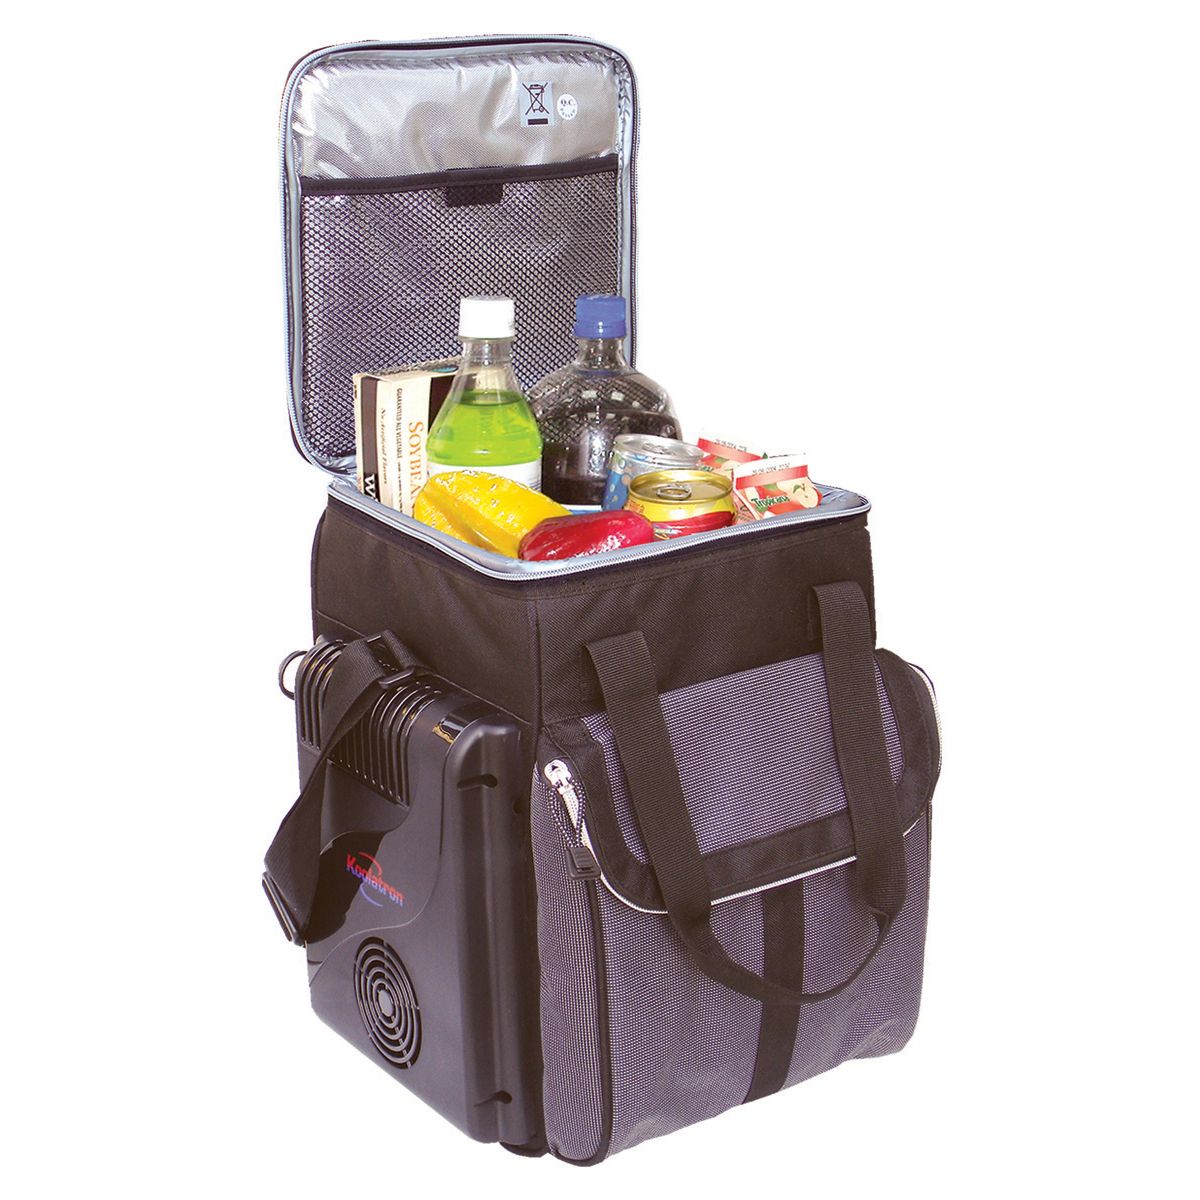 Koolatron Soft Bag Thermoelectric cooler 20 can